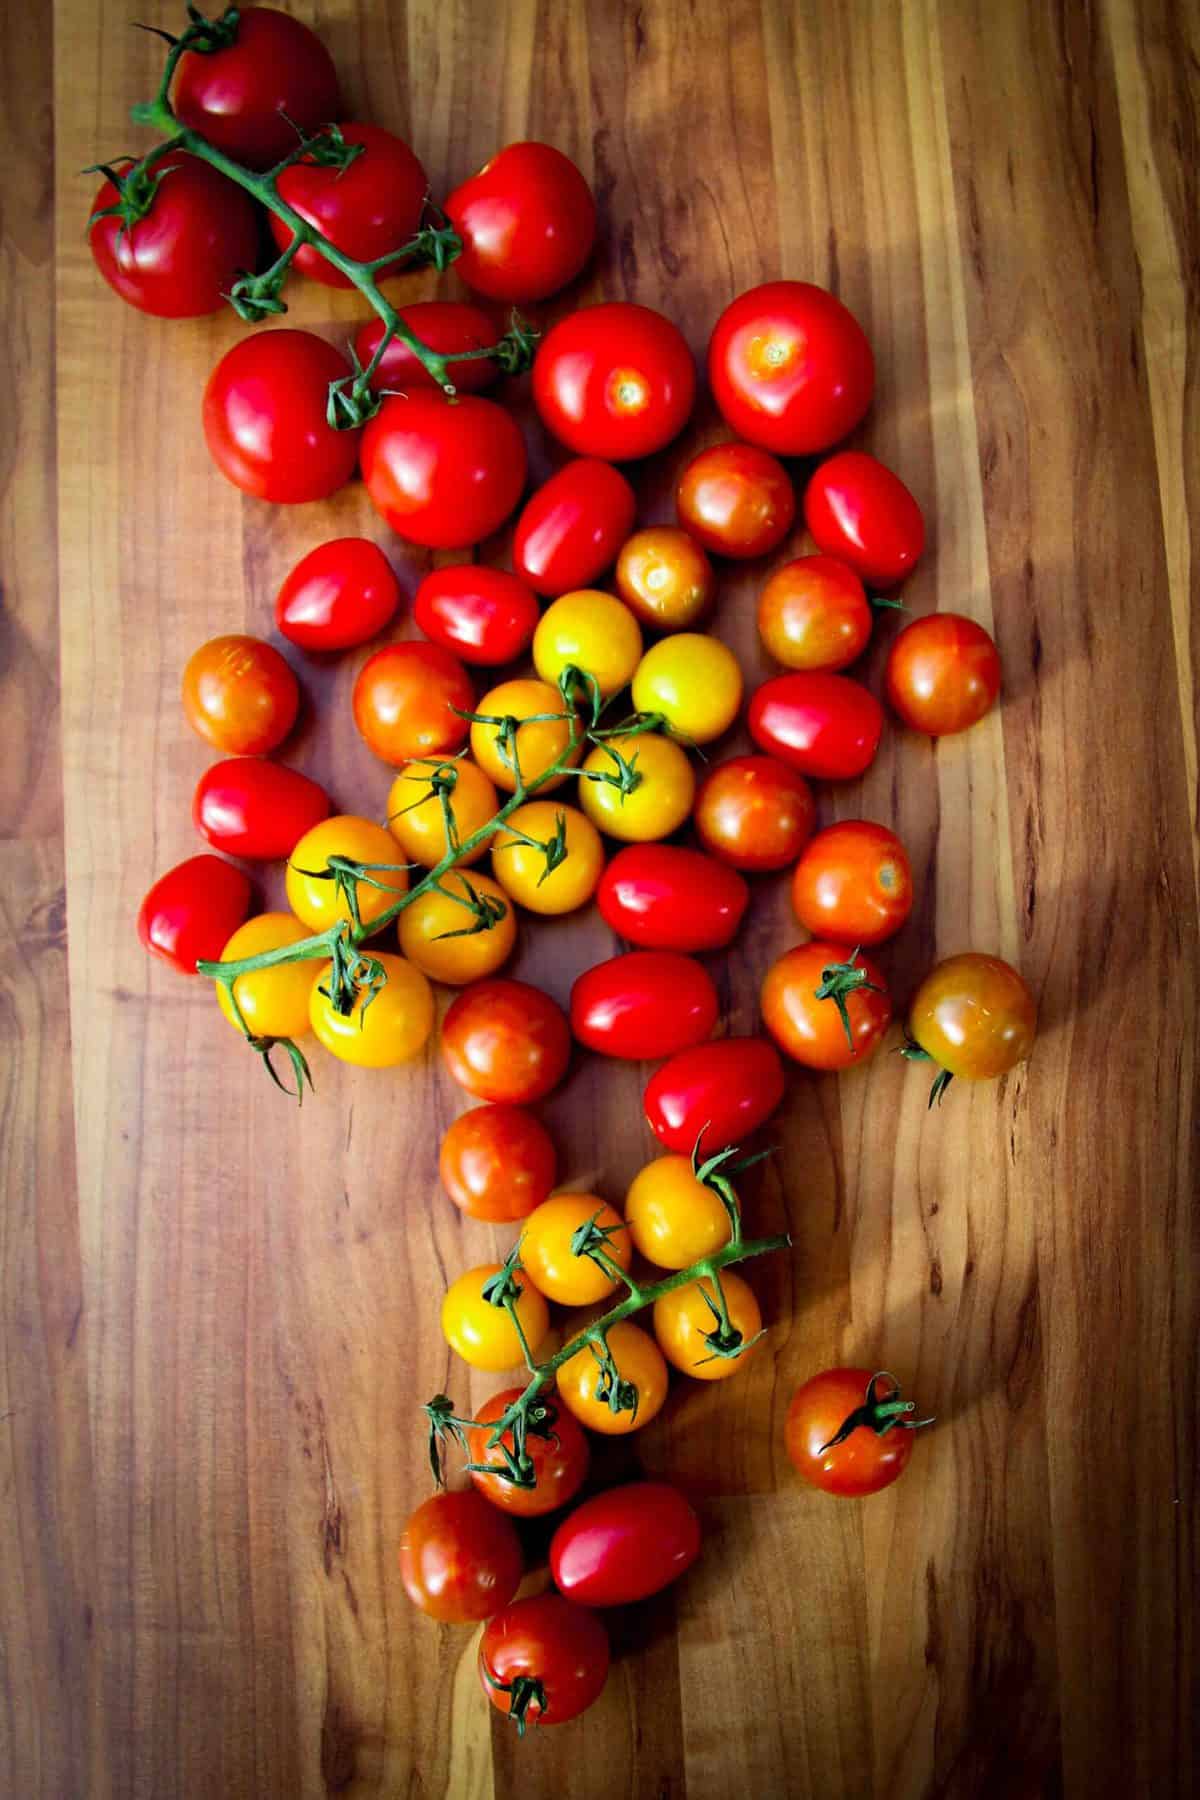 Tomatoes on a wooden board.